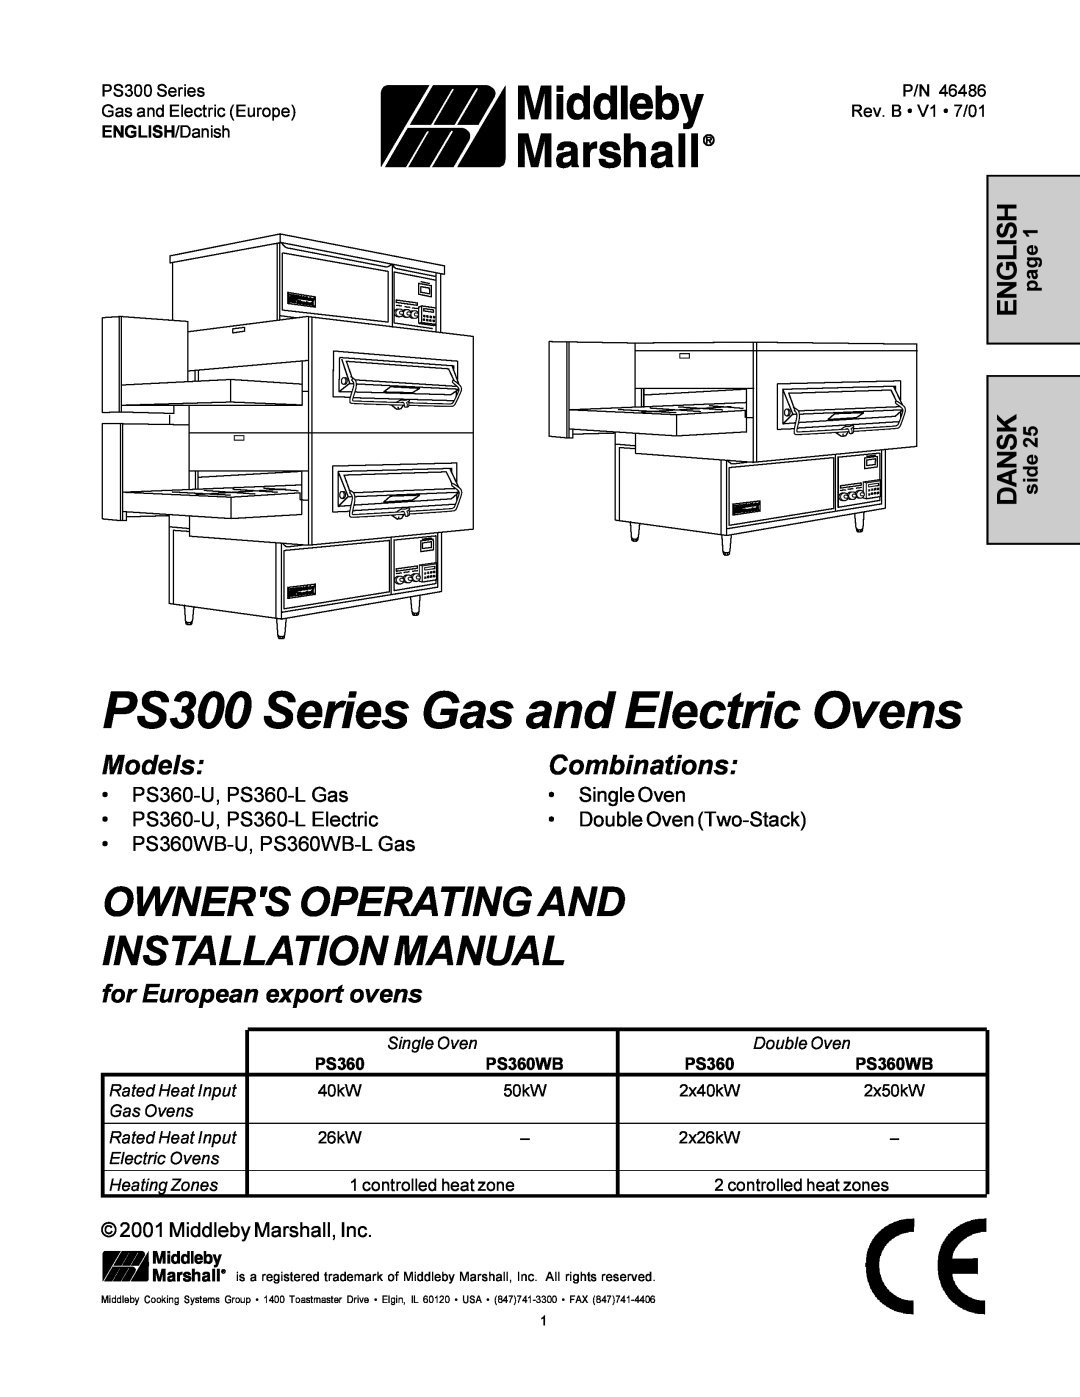 Middleby Marshall PS360-L installation manual PS300 Series Gas and Electric Ovens, ModelsCombinations, Single Oven 